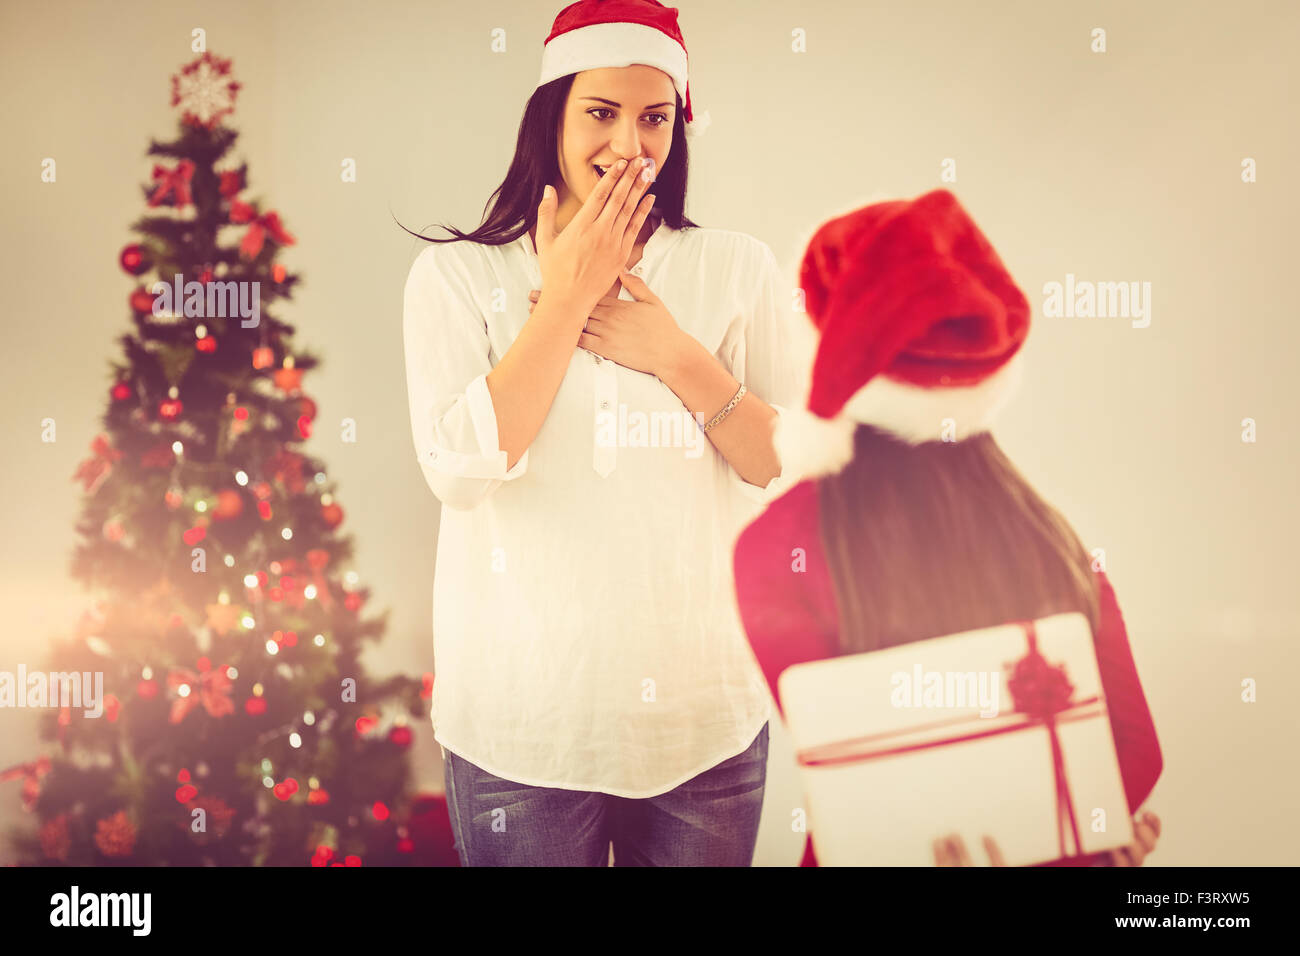 Daughter surprising her mother with christmas gift Stock Photo